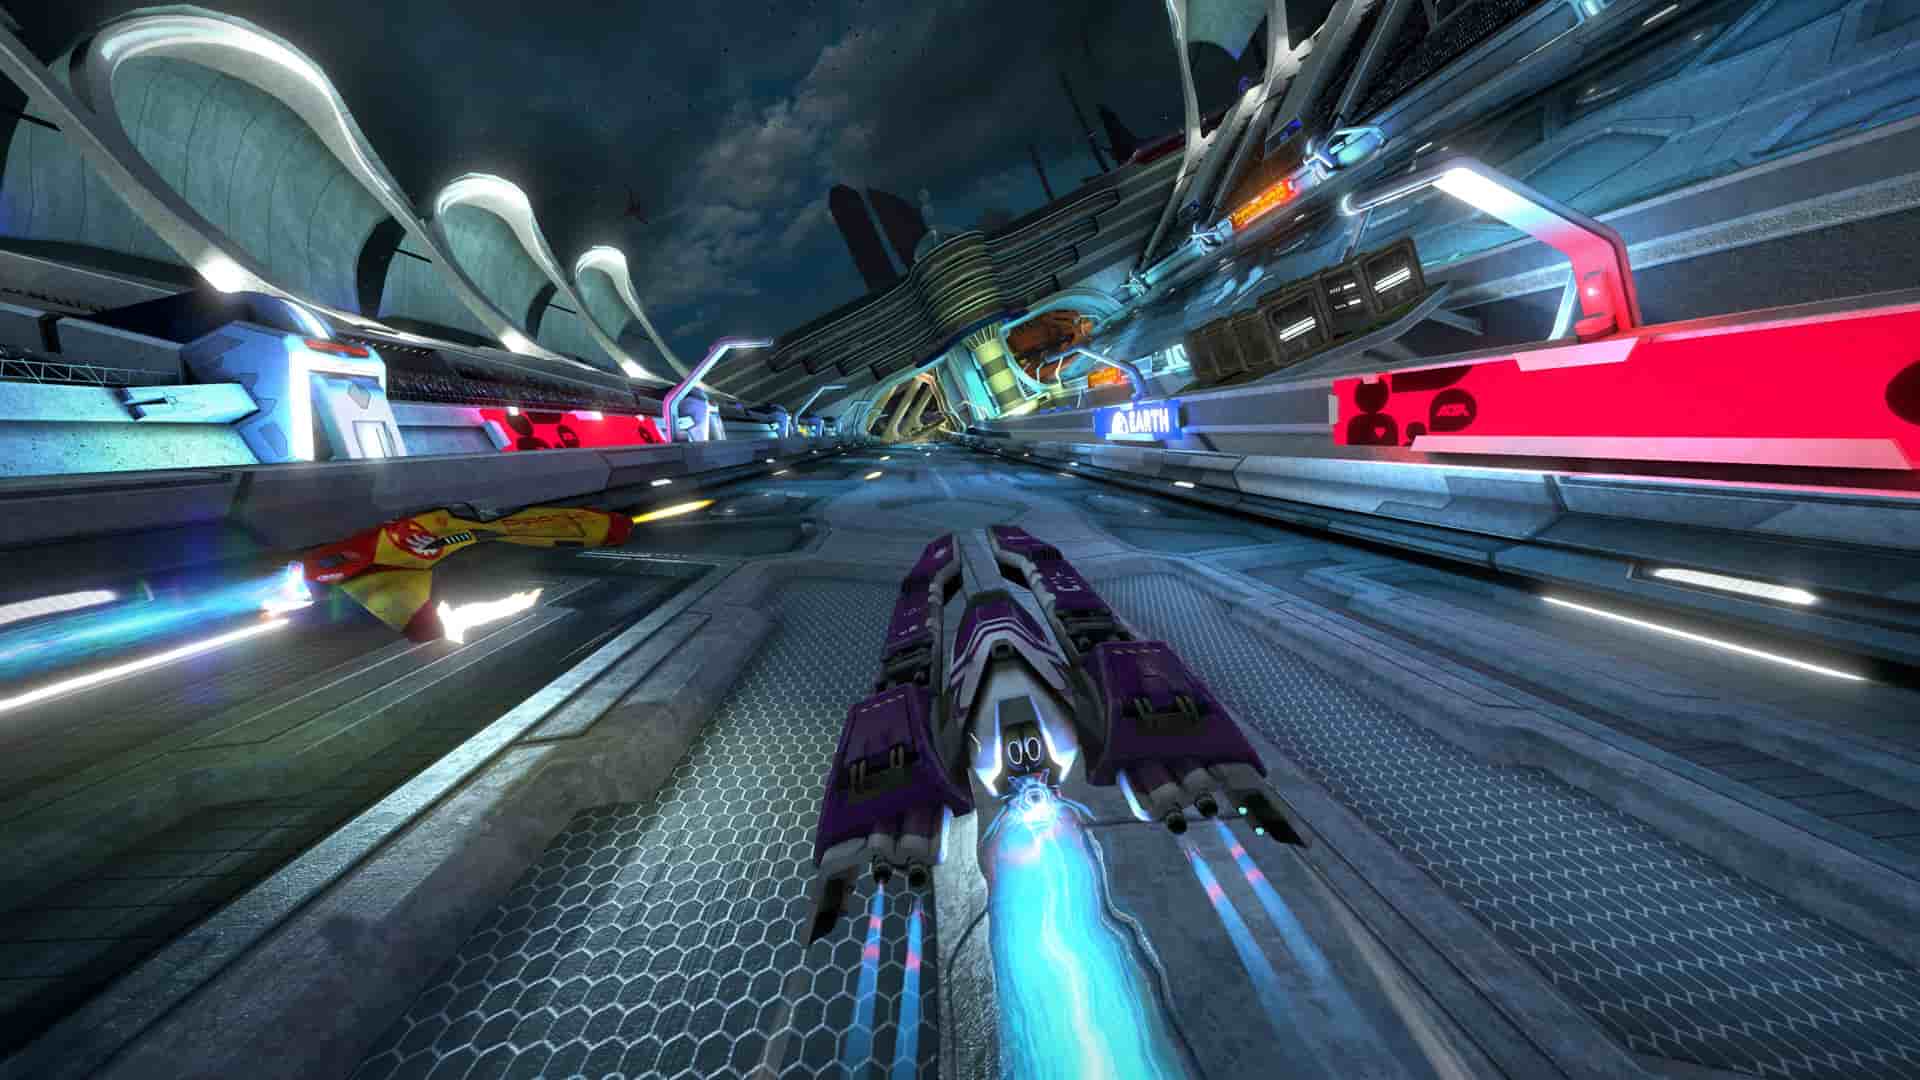 omega wipeout ps4